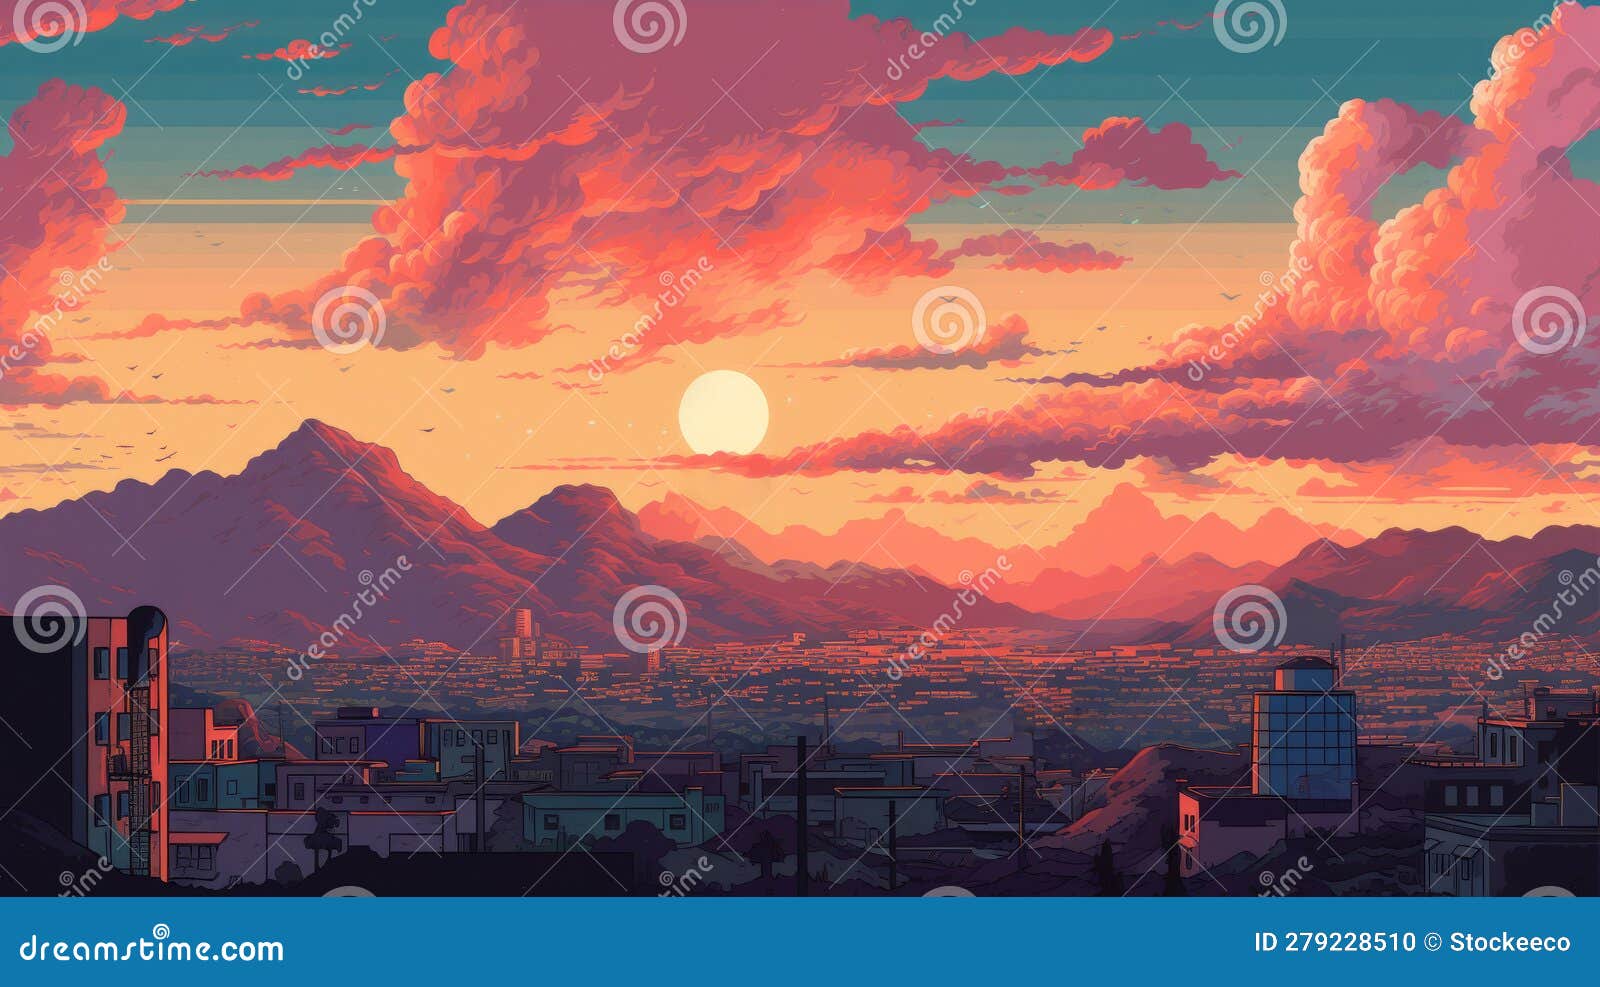 el paso sunset in 1770s: a pixel art close-up